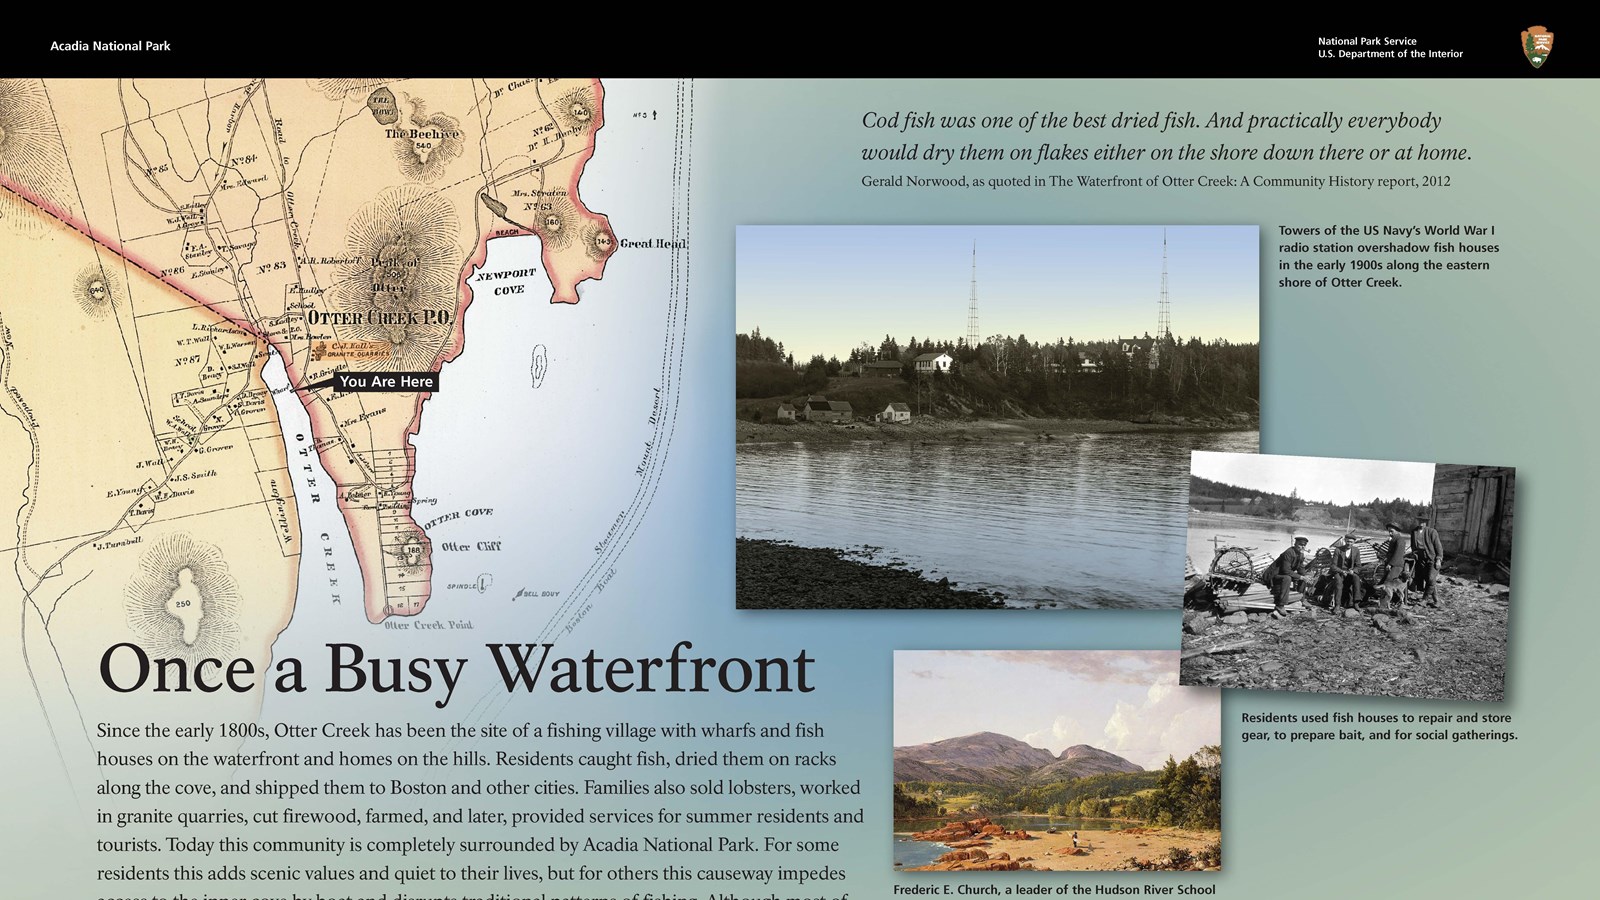 Title: Once a Busy Waterfront; Various images of a background of historic map and historic images.